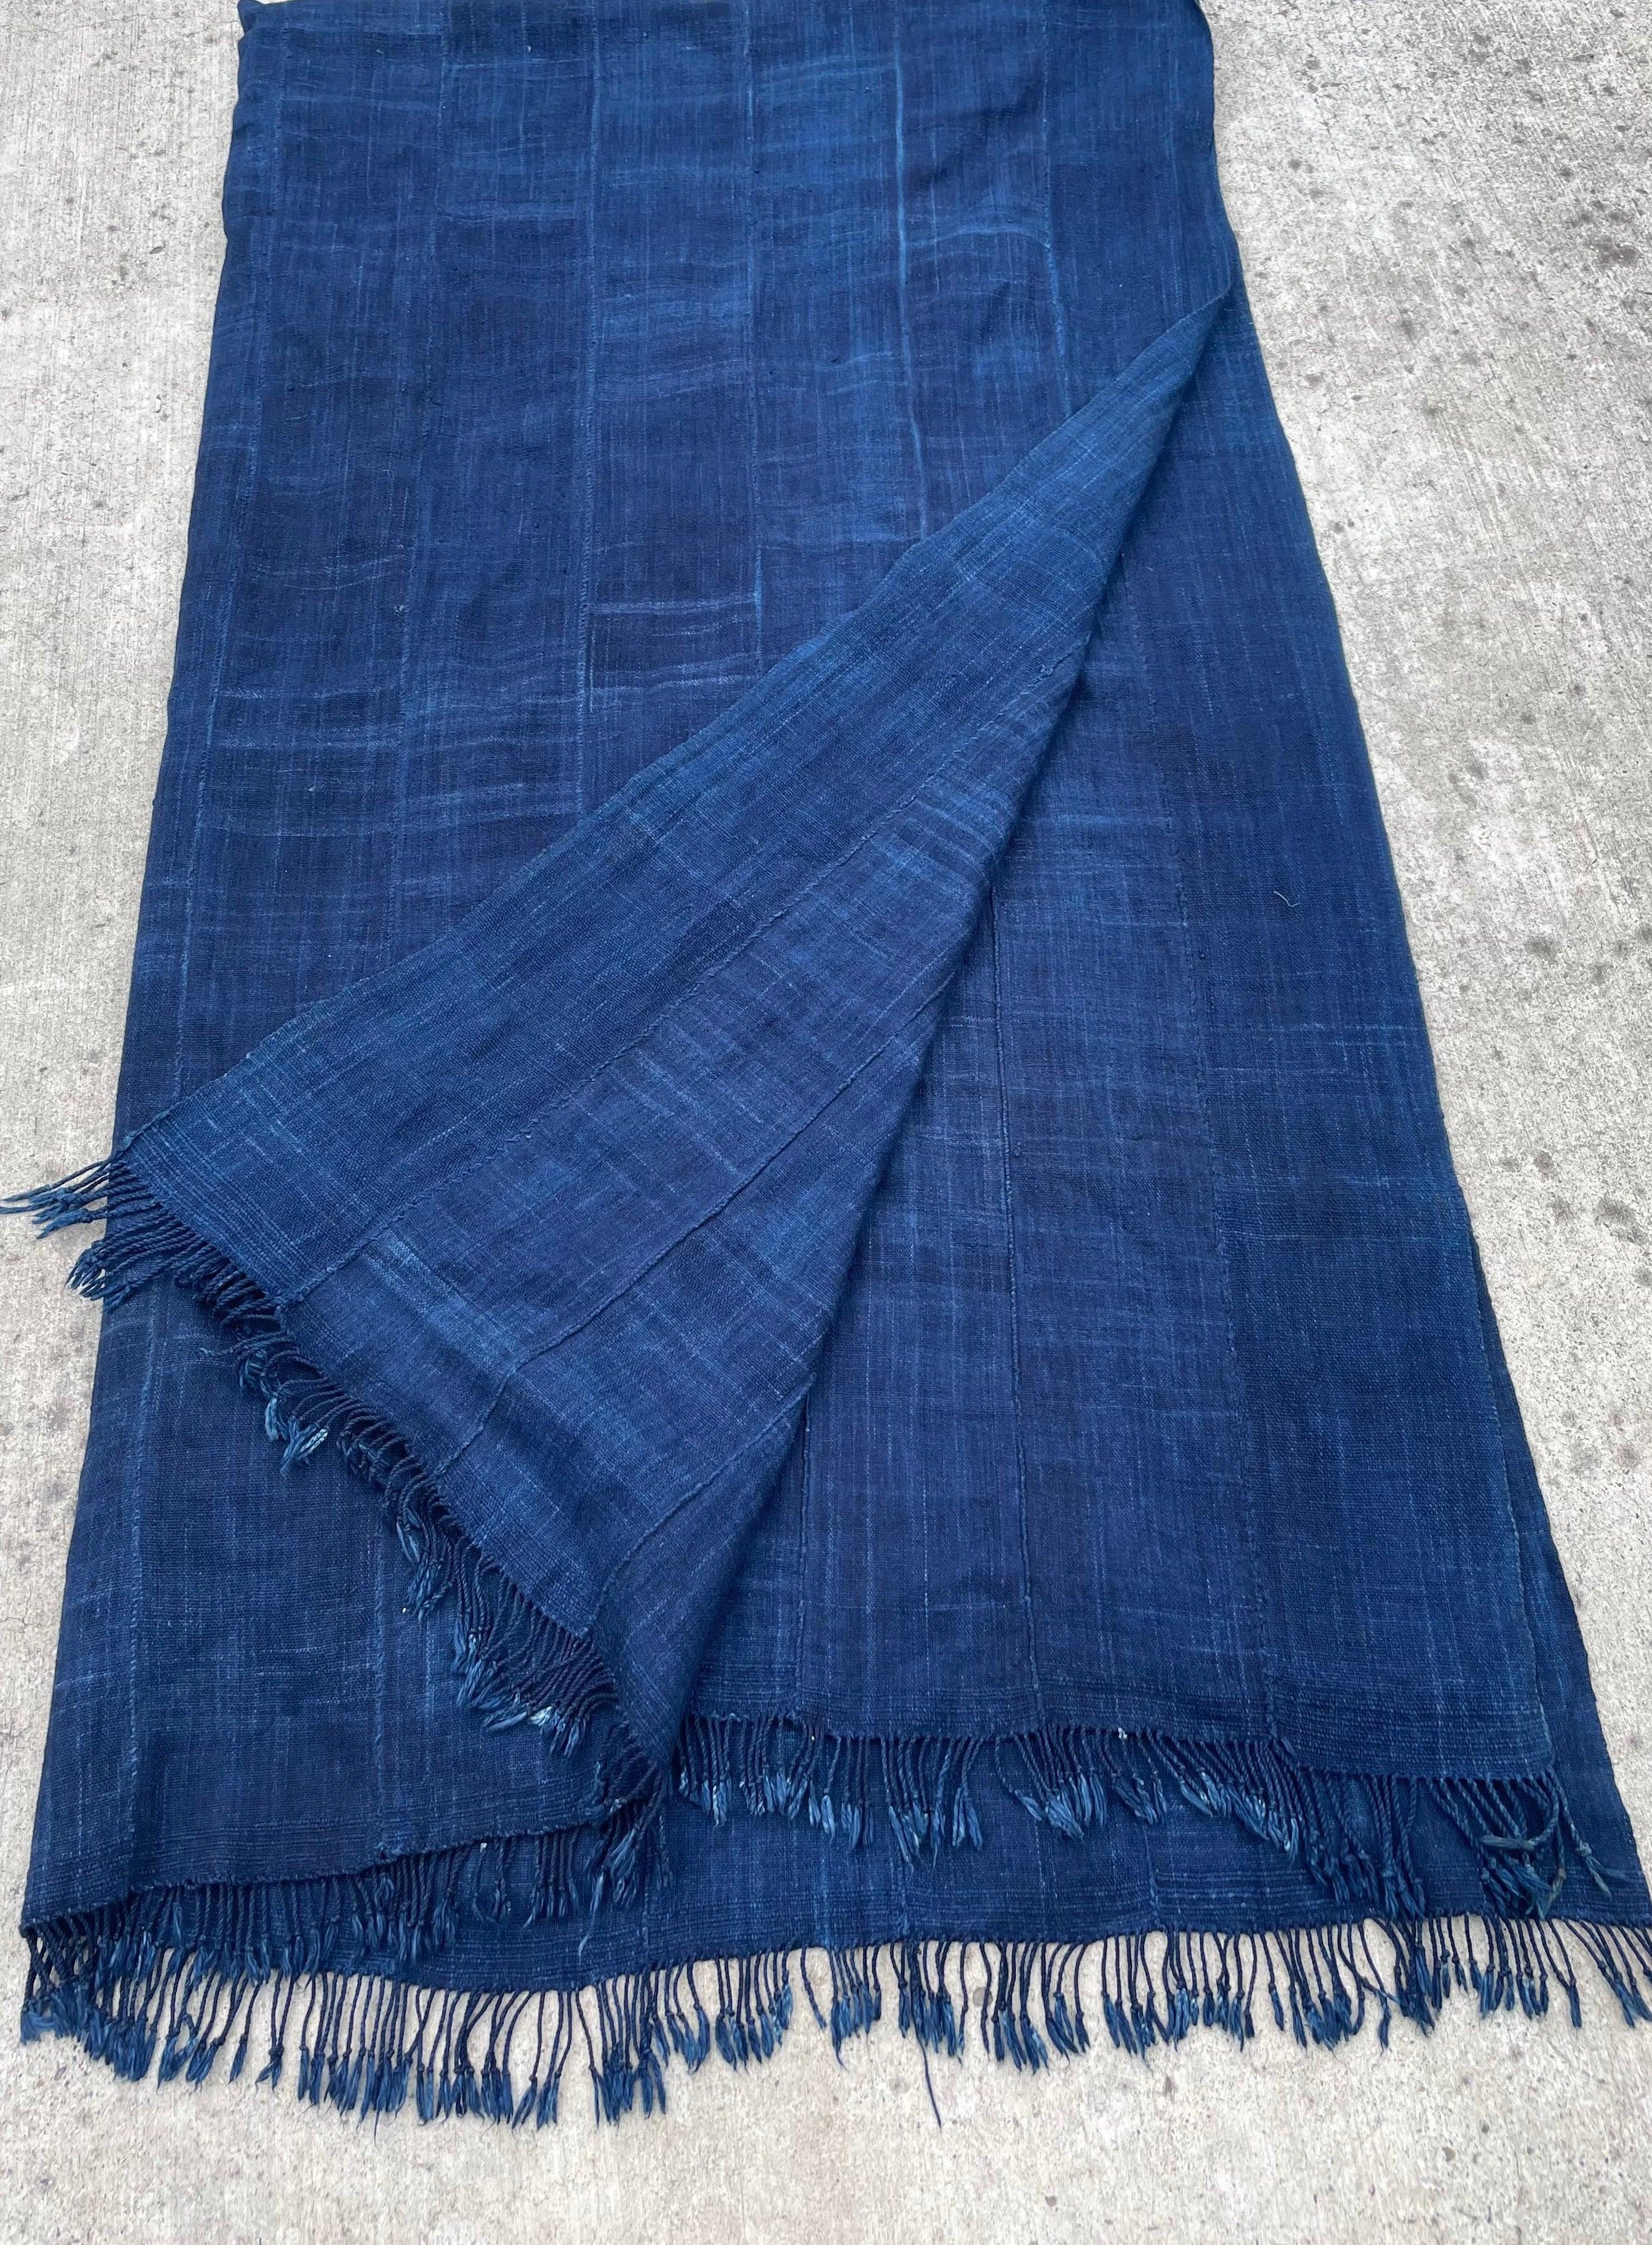 Handcrafted Textiles;Woven Fabrics Of Jute Or Of Other Textile Based Fibers; Vintage; Living Spaces; Home Decor;Indigo Blue Cotton Fabric, Hand Dyed African Cloth